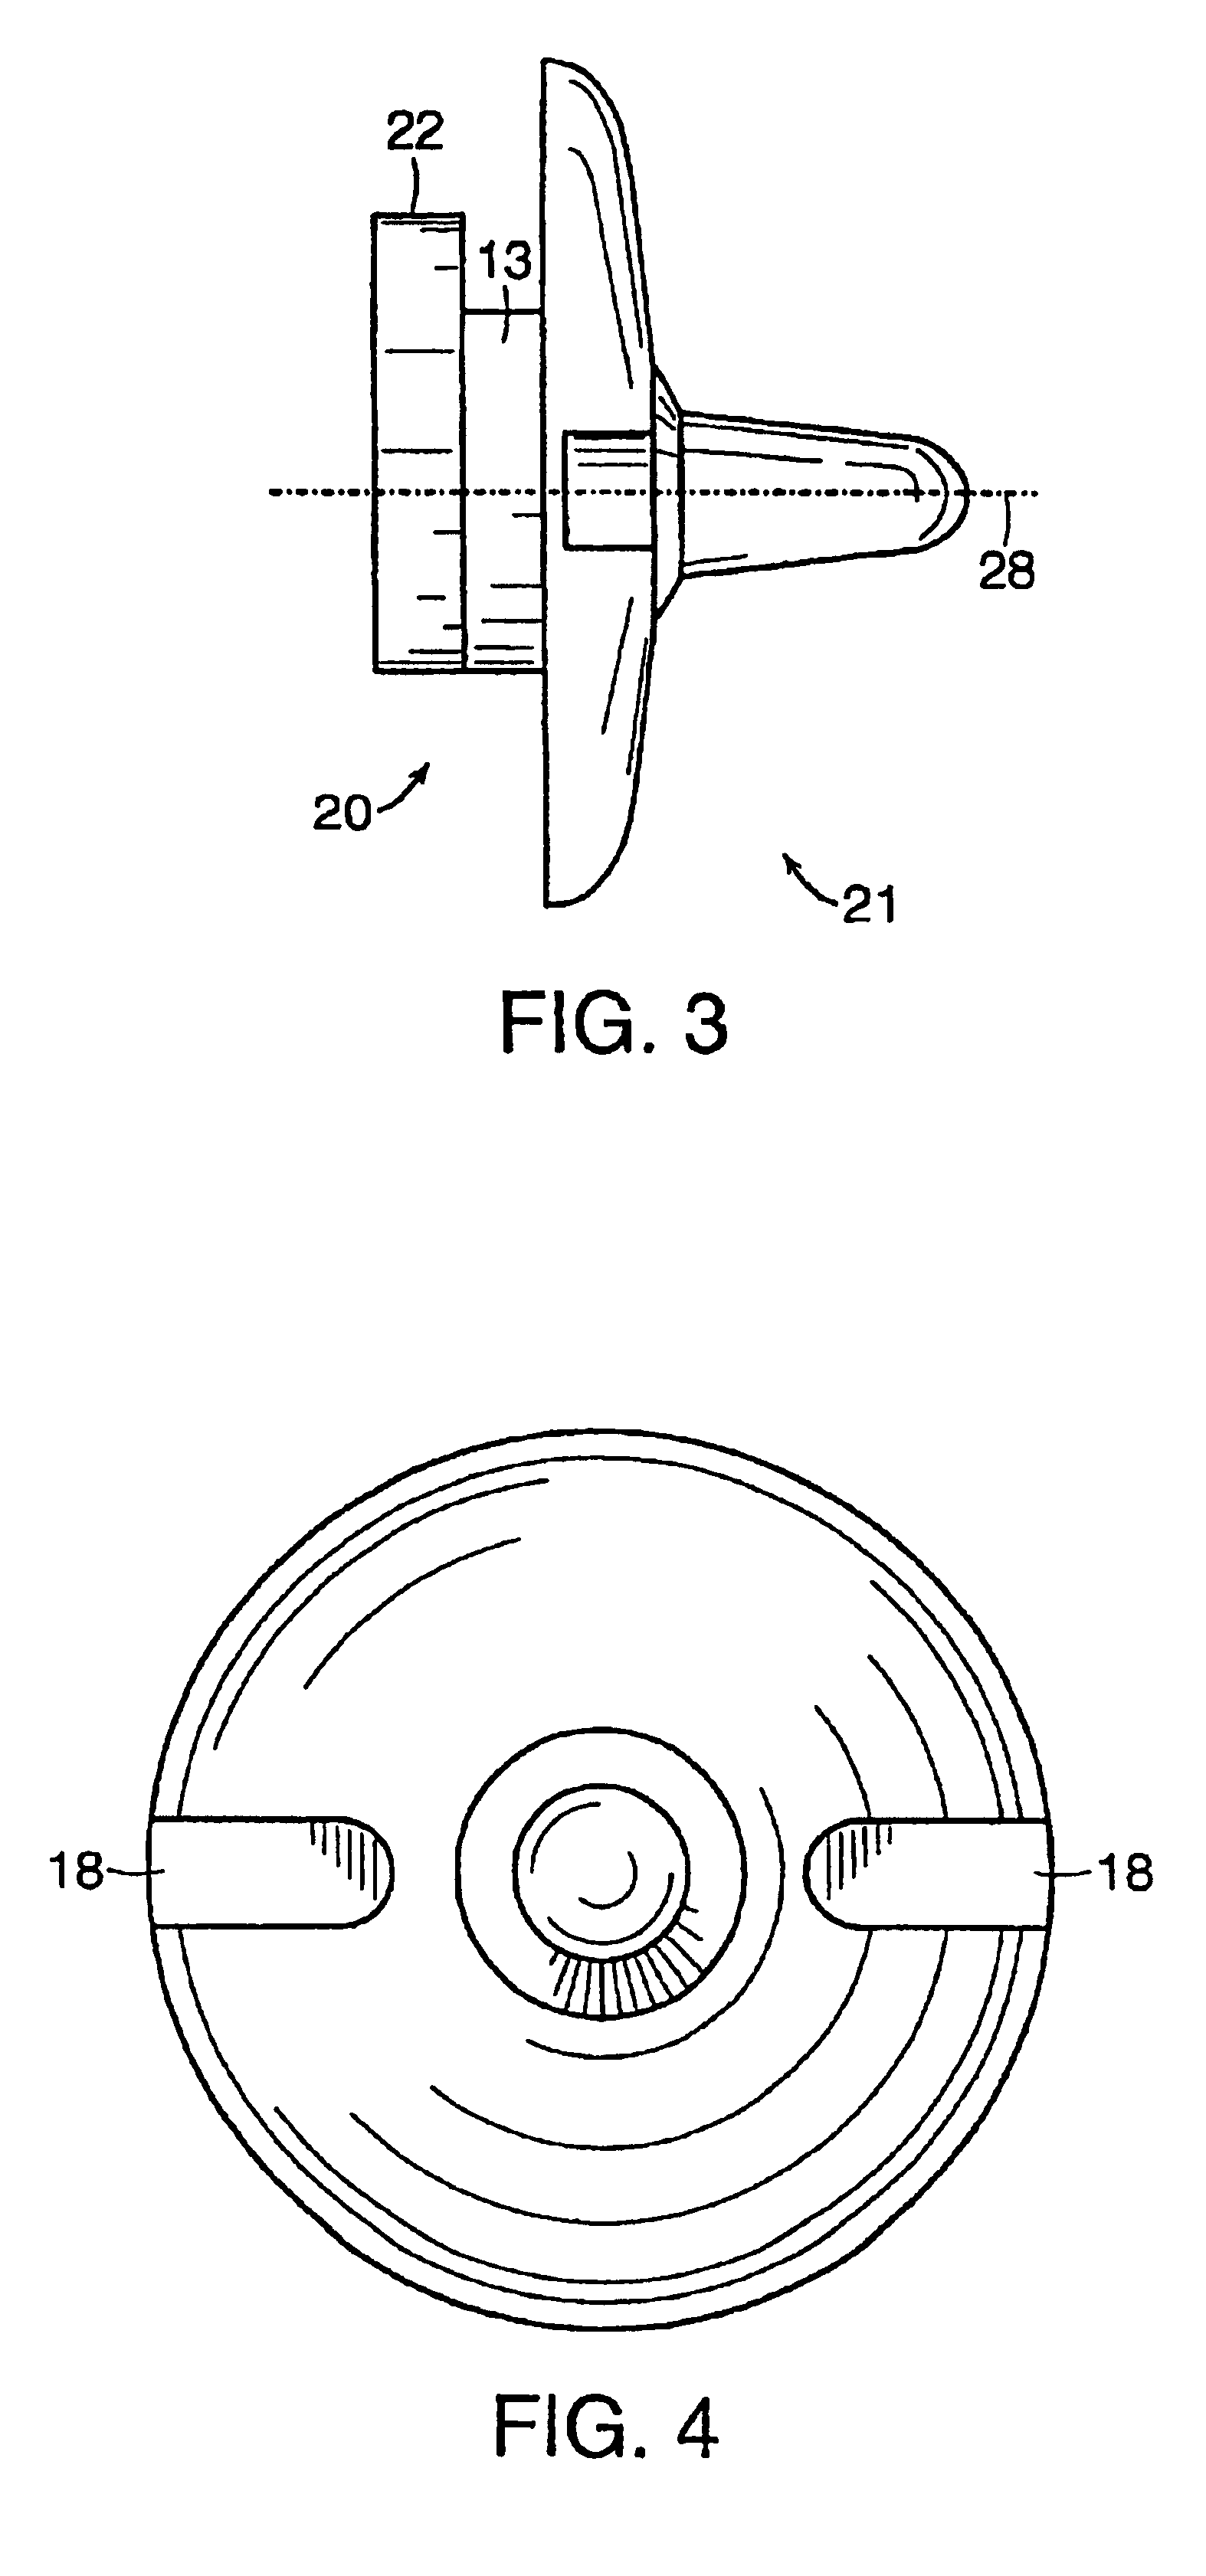 Method of using removable cleat system